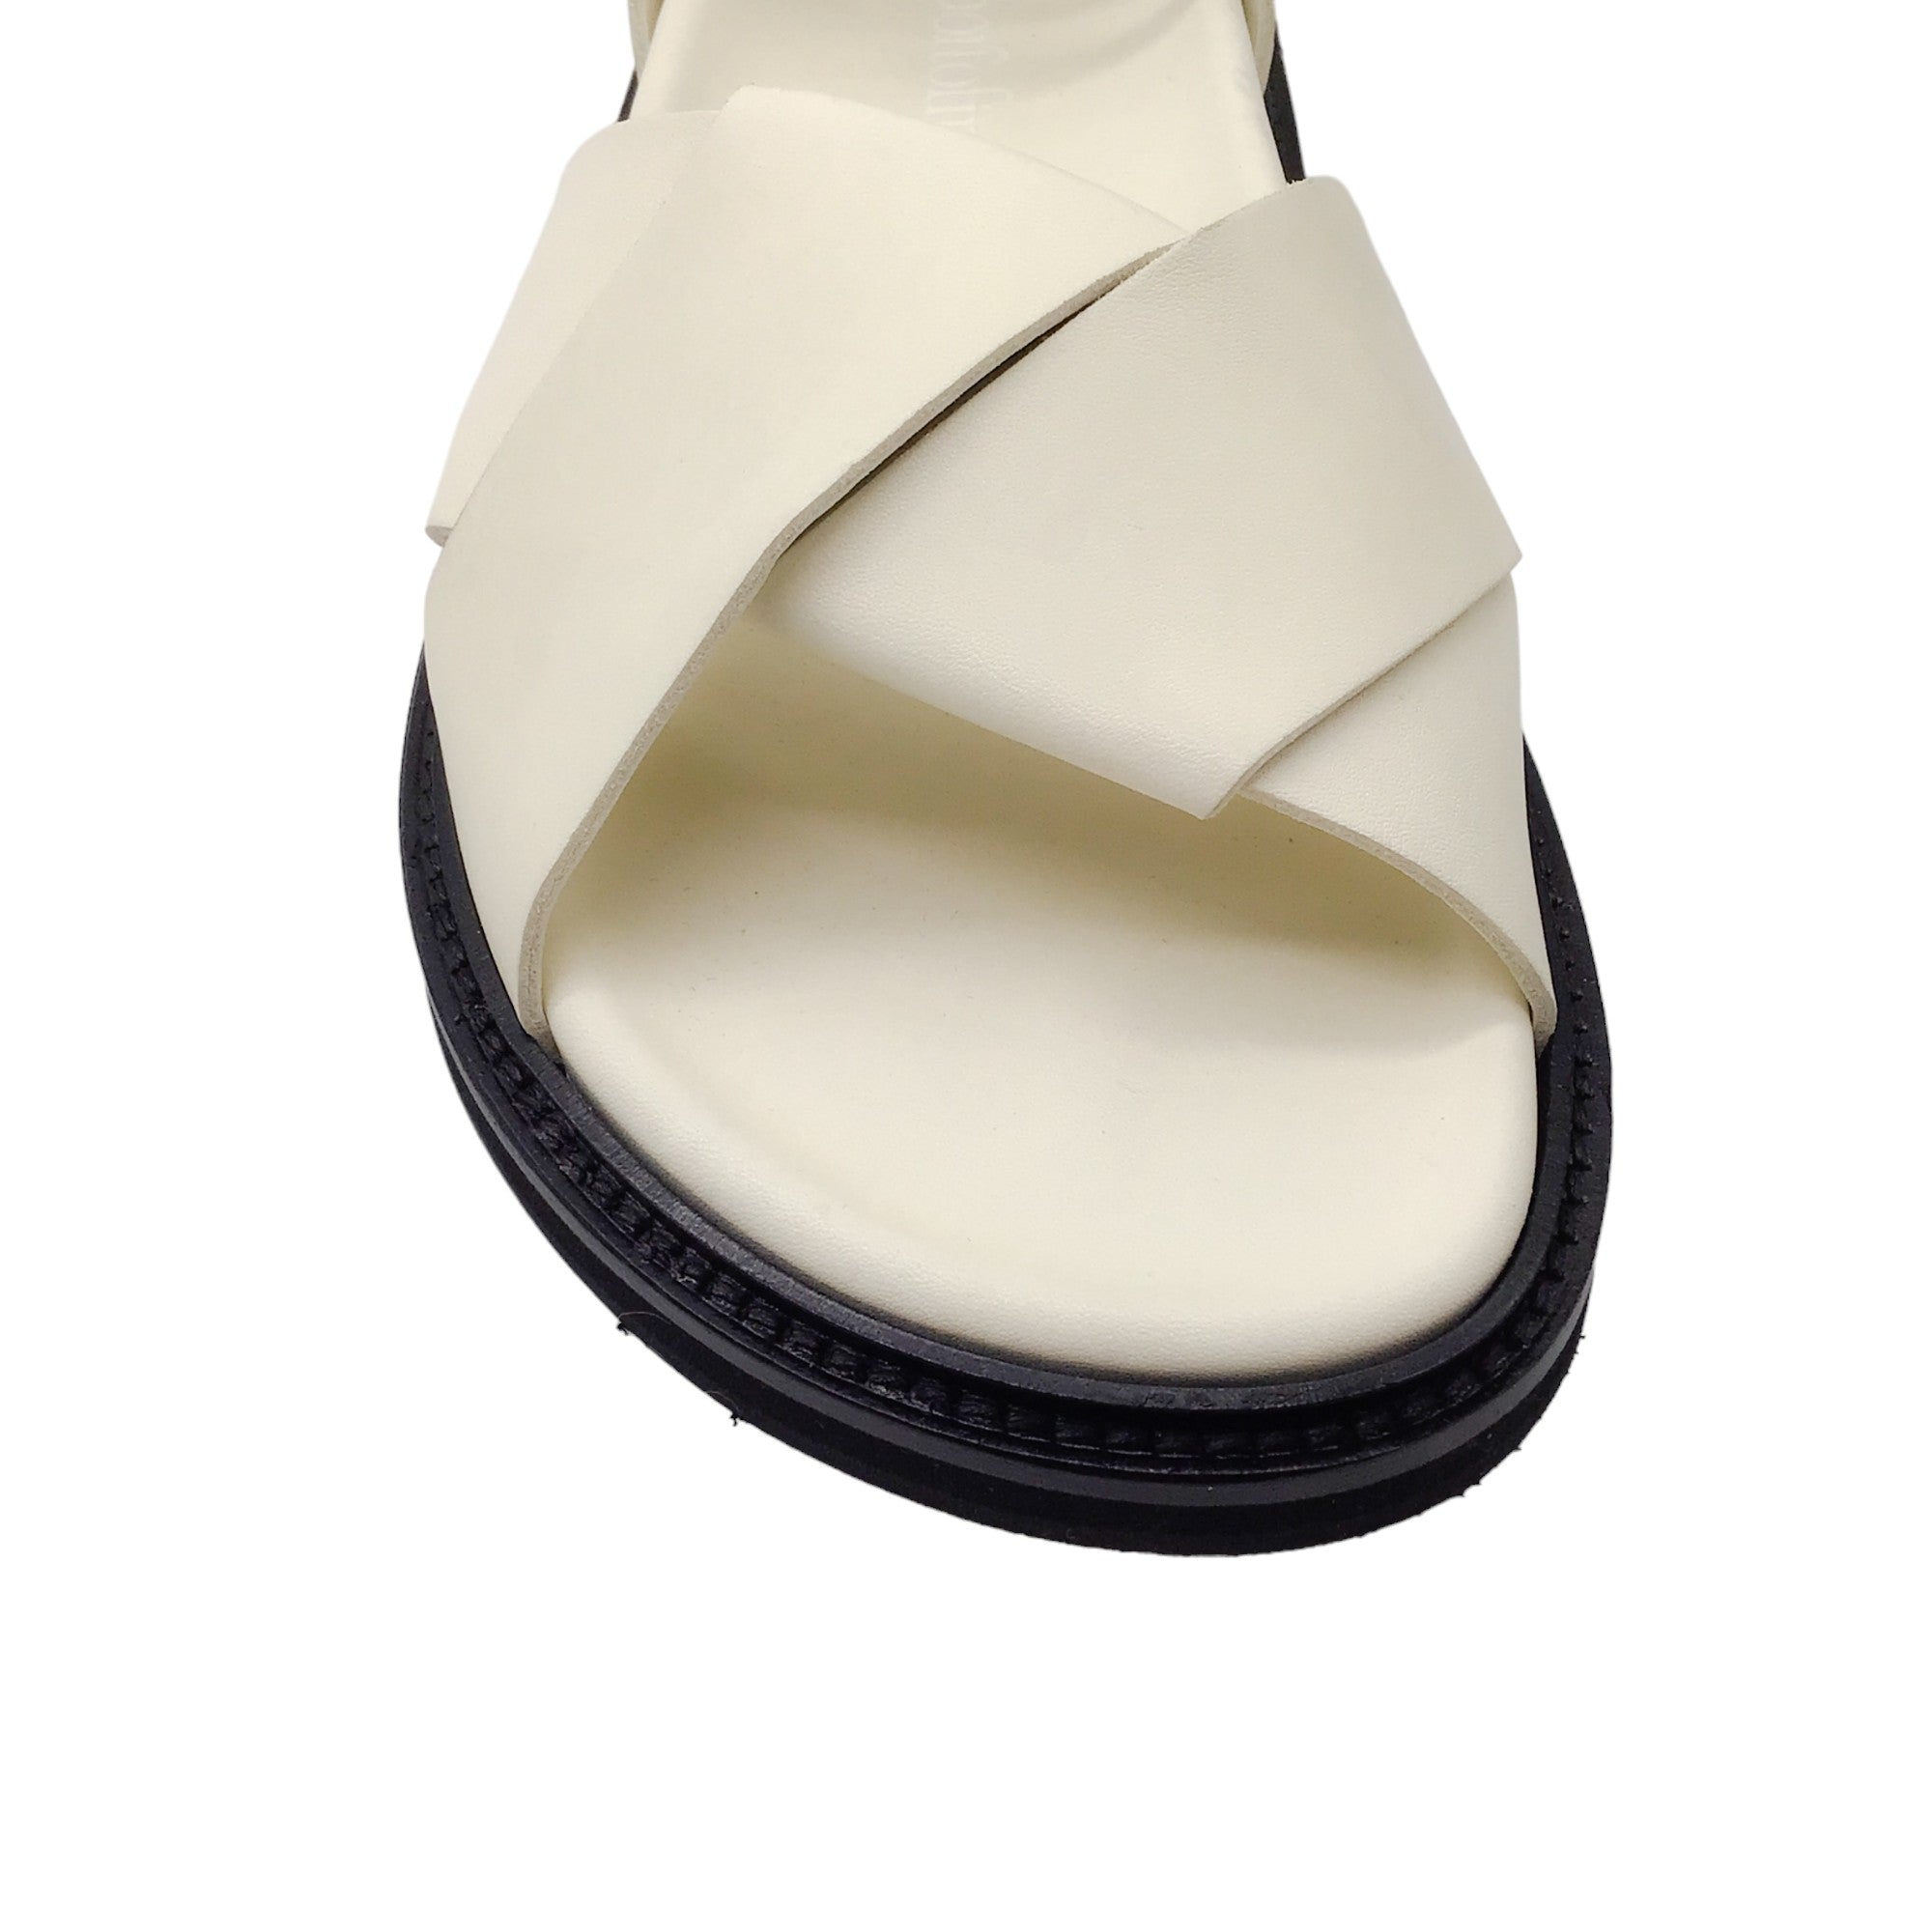 Gentry Portofino Ivory Criss Cross Leather Ankle Strap Flat Sandals